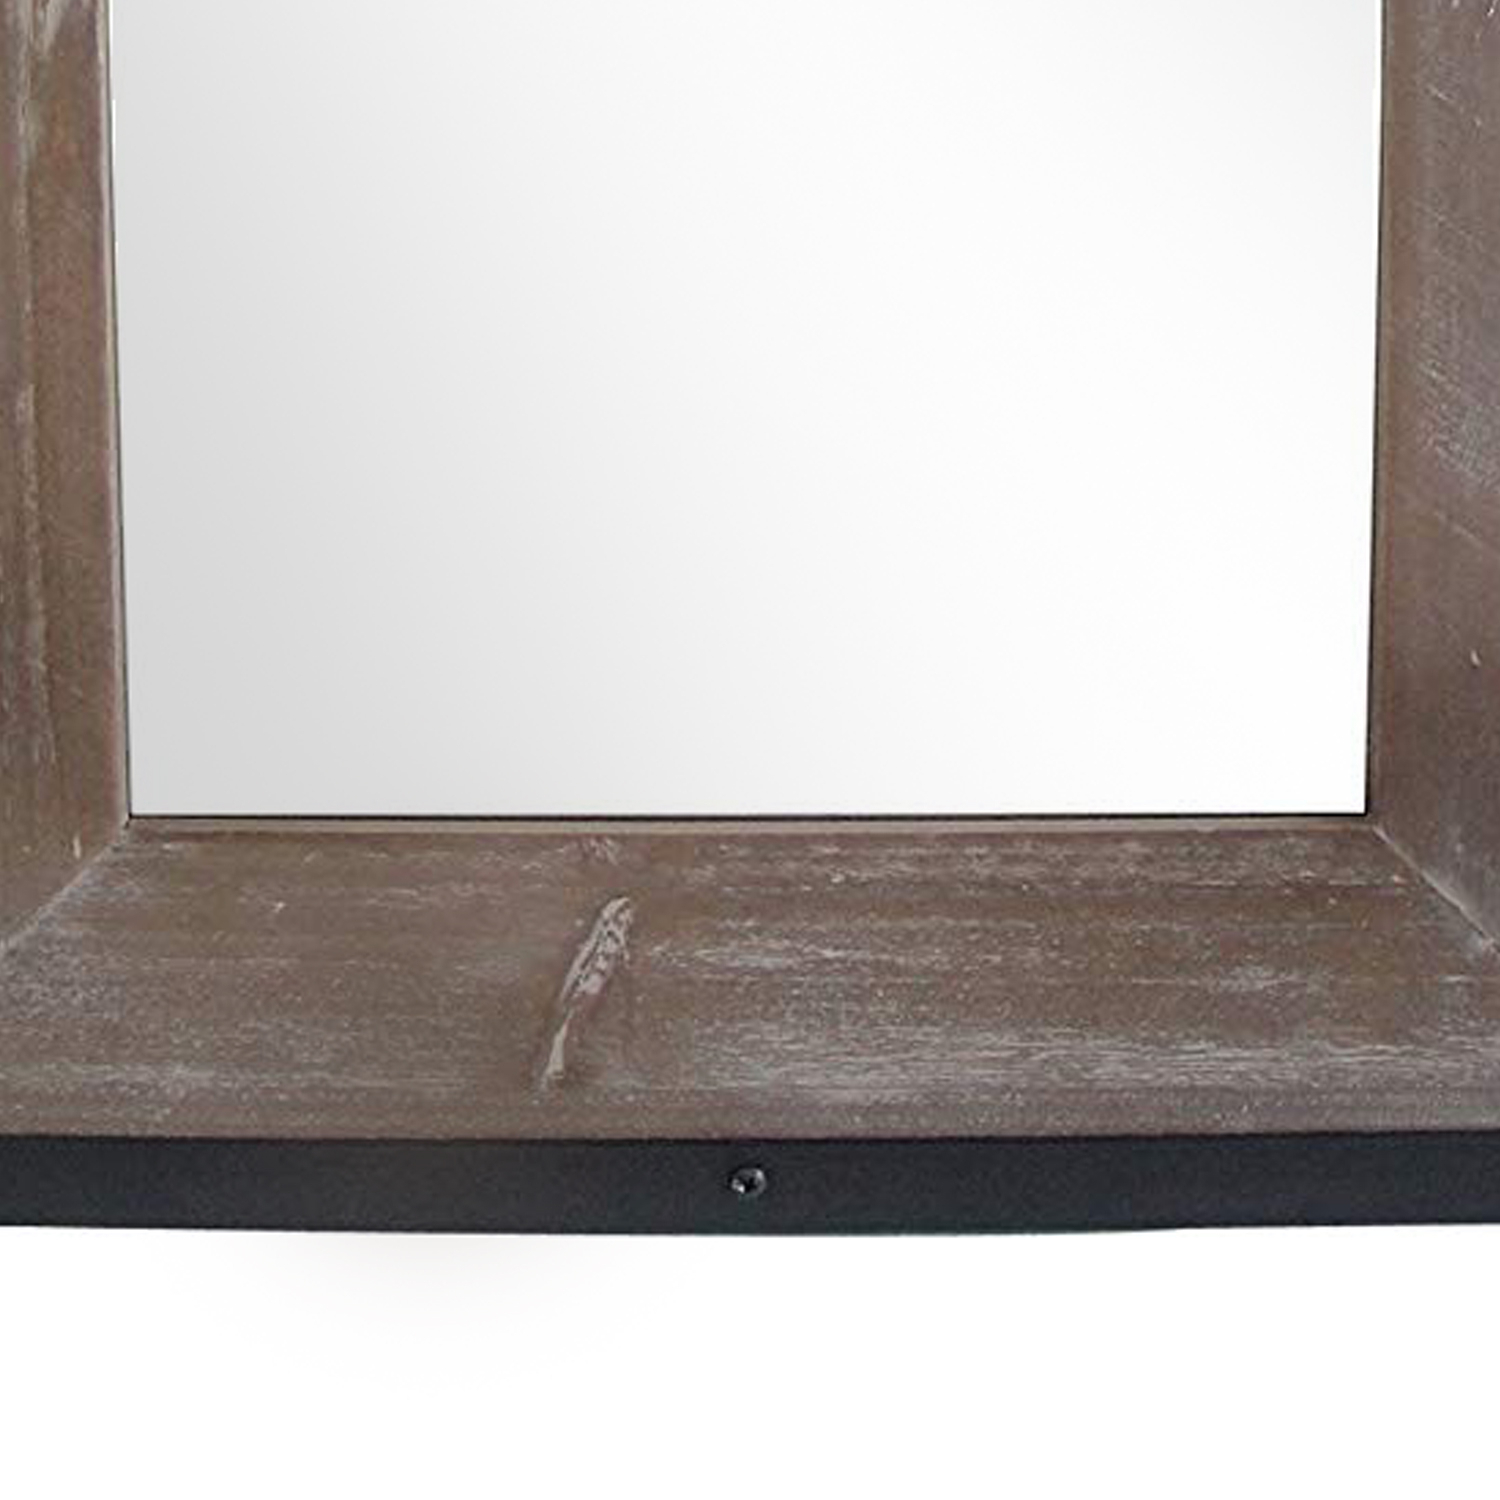 Transitional Mirror With Wooden Framing And Metal Outline, Black & Brown- Saltoro Sherpi